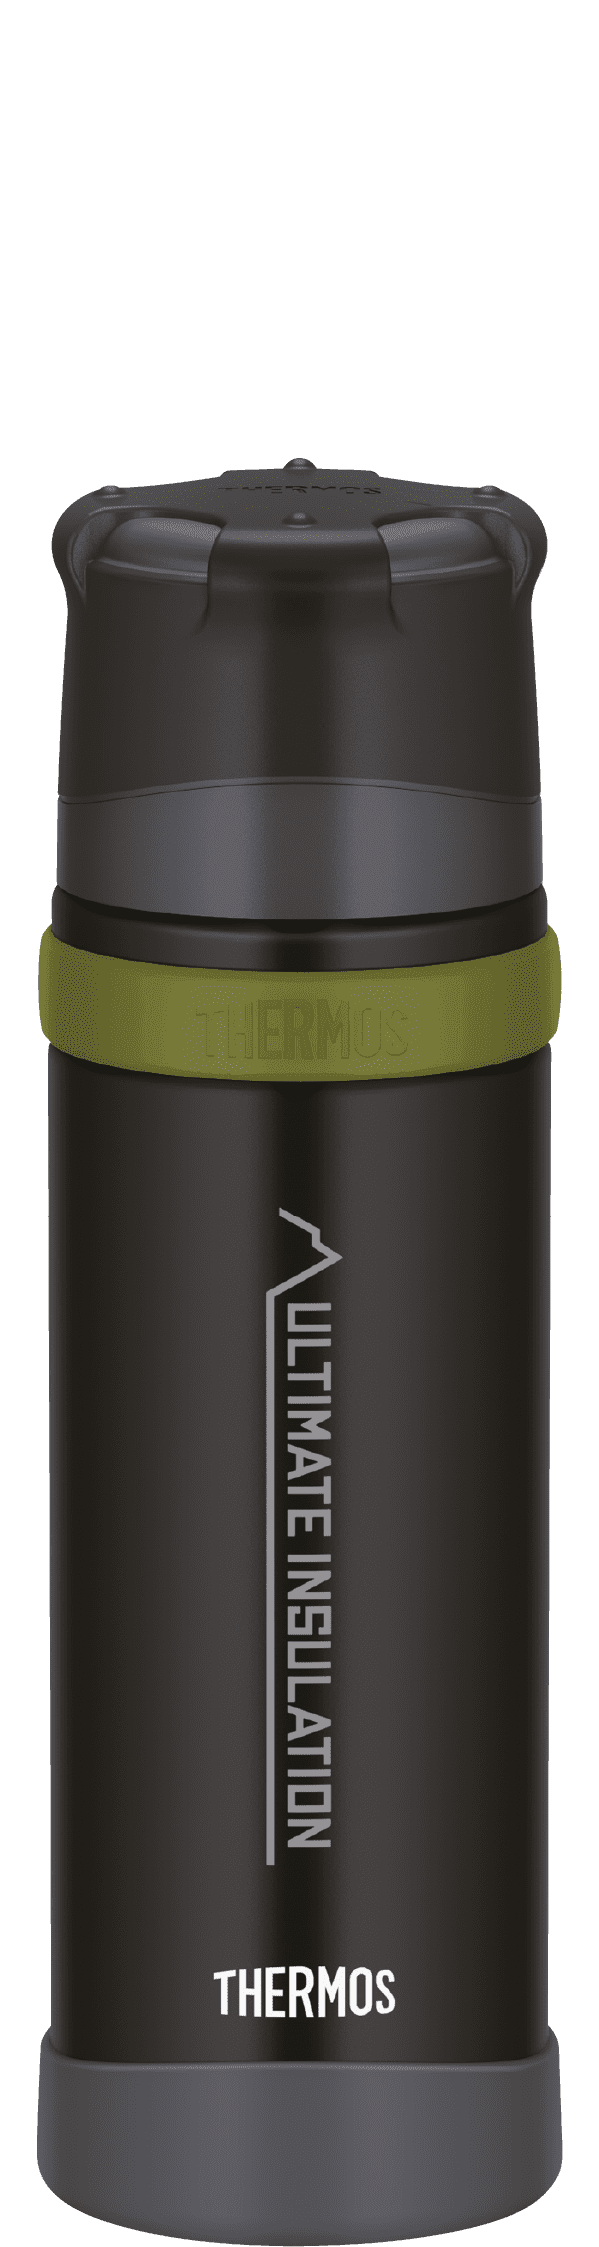 Thermos Isolierflasche MOUNTAIN charcoal black 0,5l